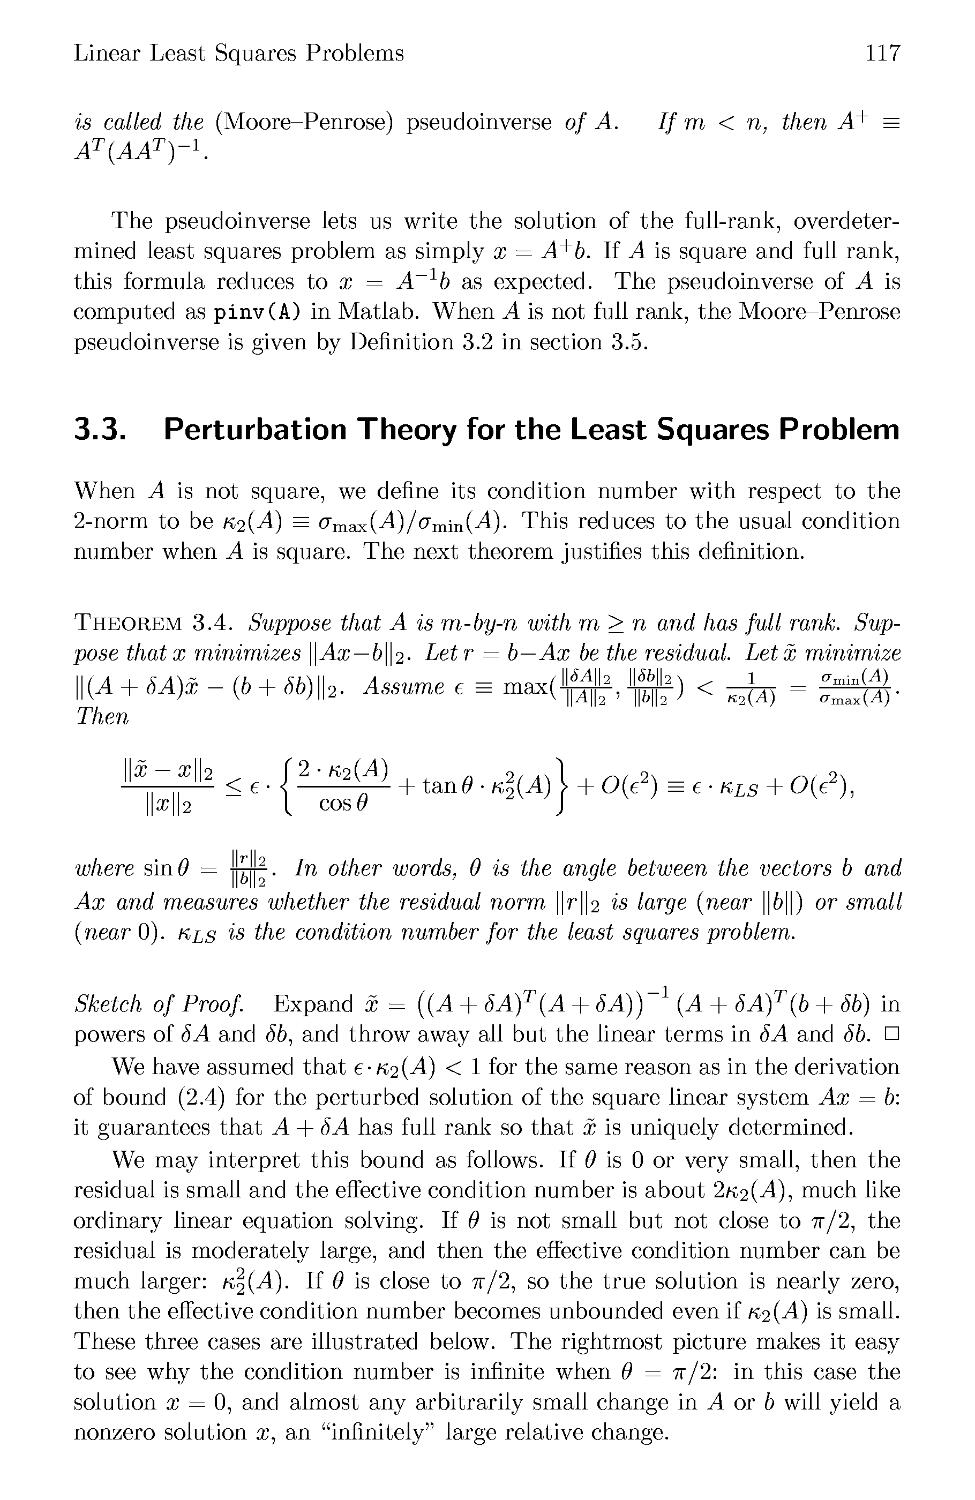 3.3 Perturbation Theory for the Least Squares Problem